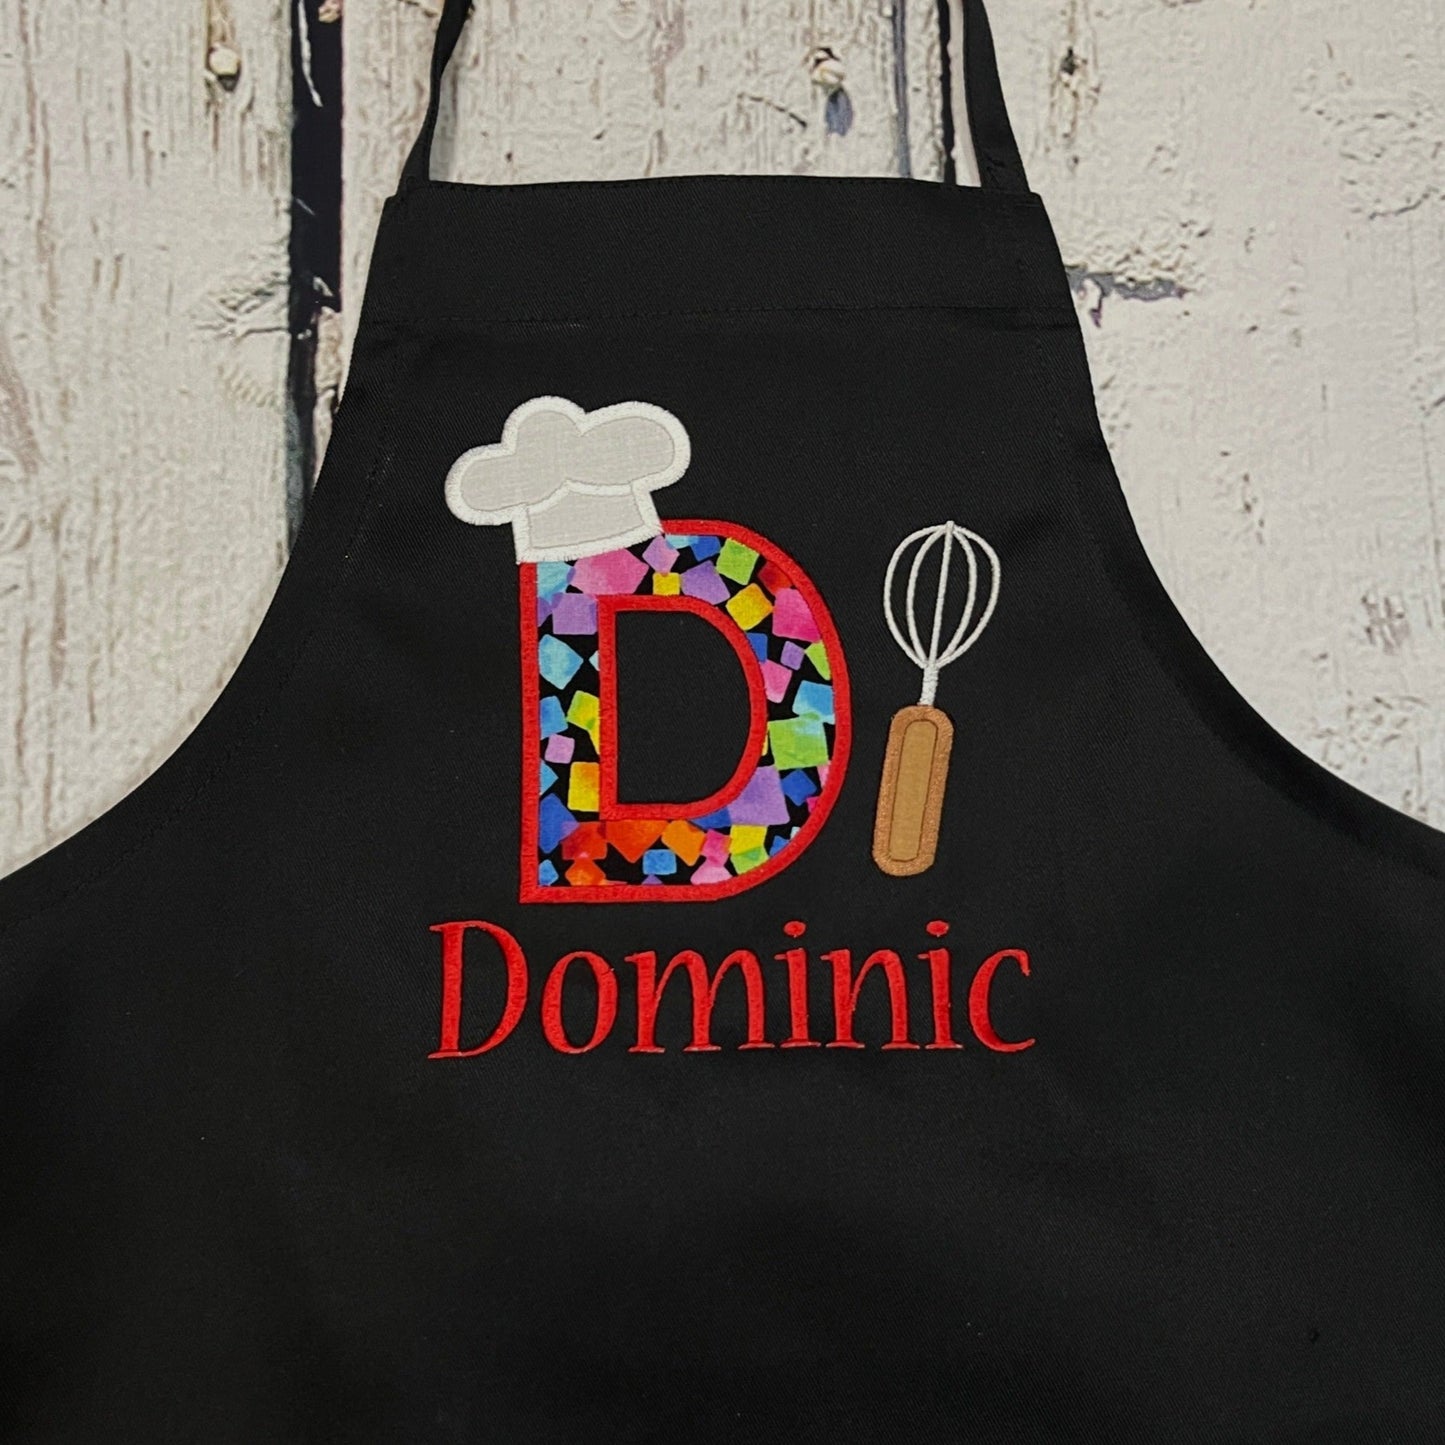 Boys personalized embroidered apron with large initial and name on black apron